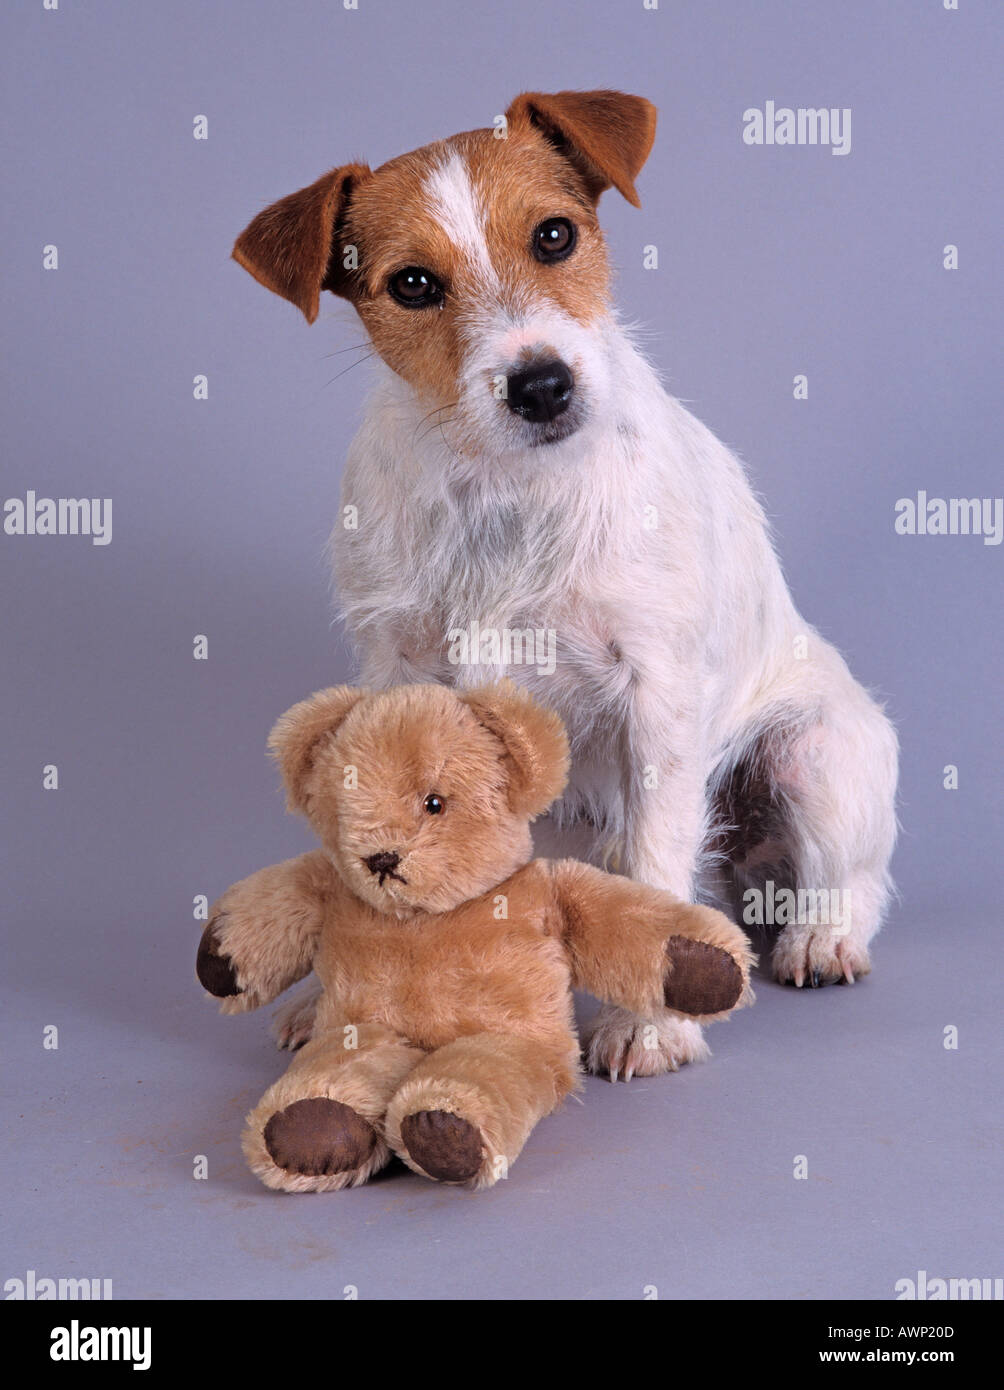 Jack Russell Terrier and teddy bear Stock Photo - Alamy